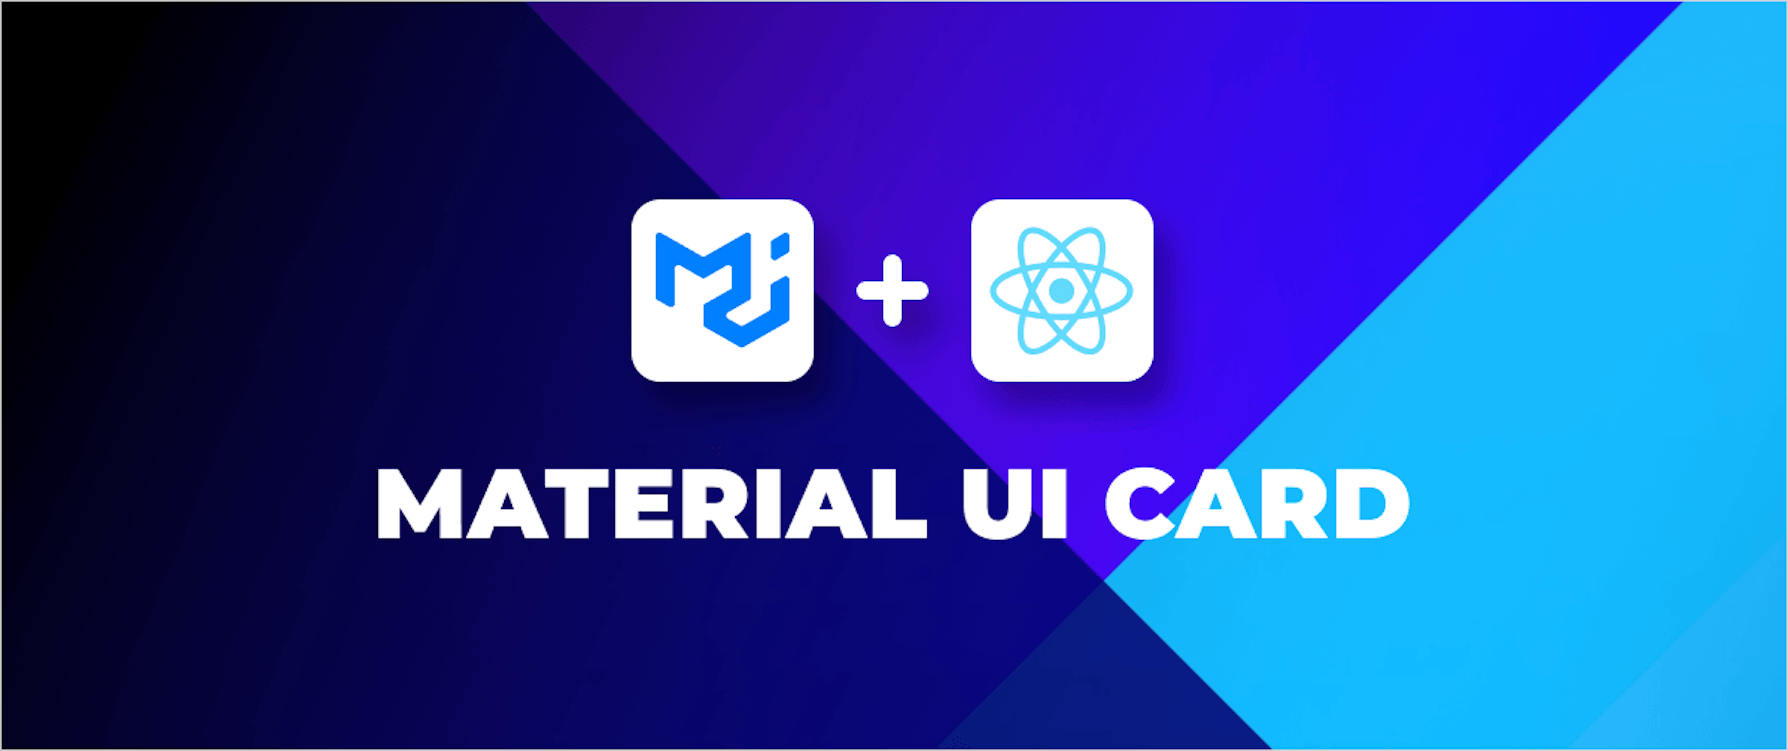 How to use Material UI Card Component